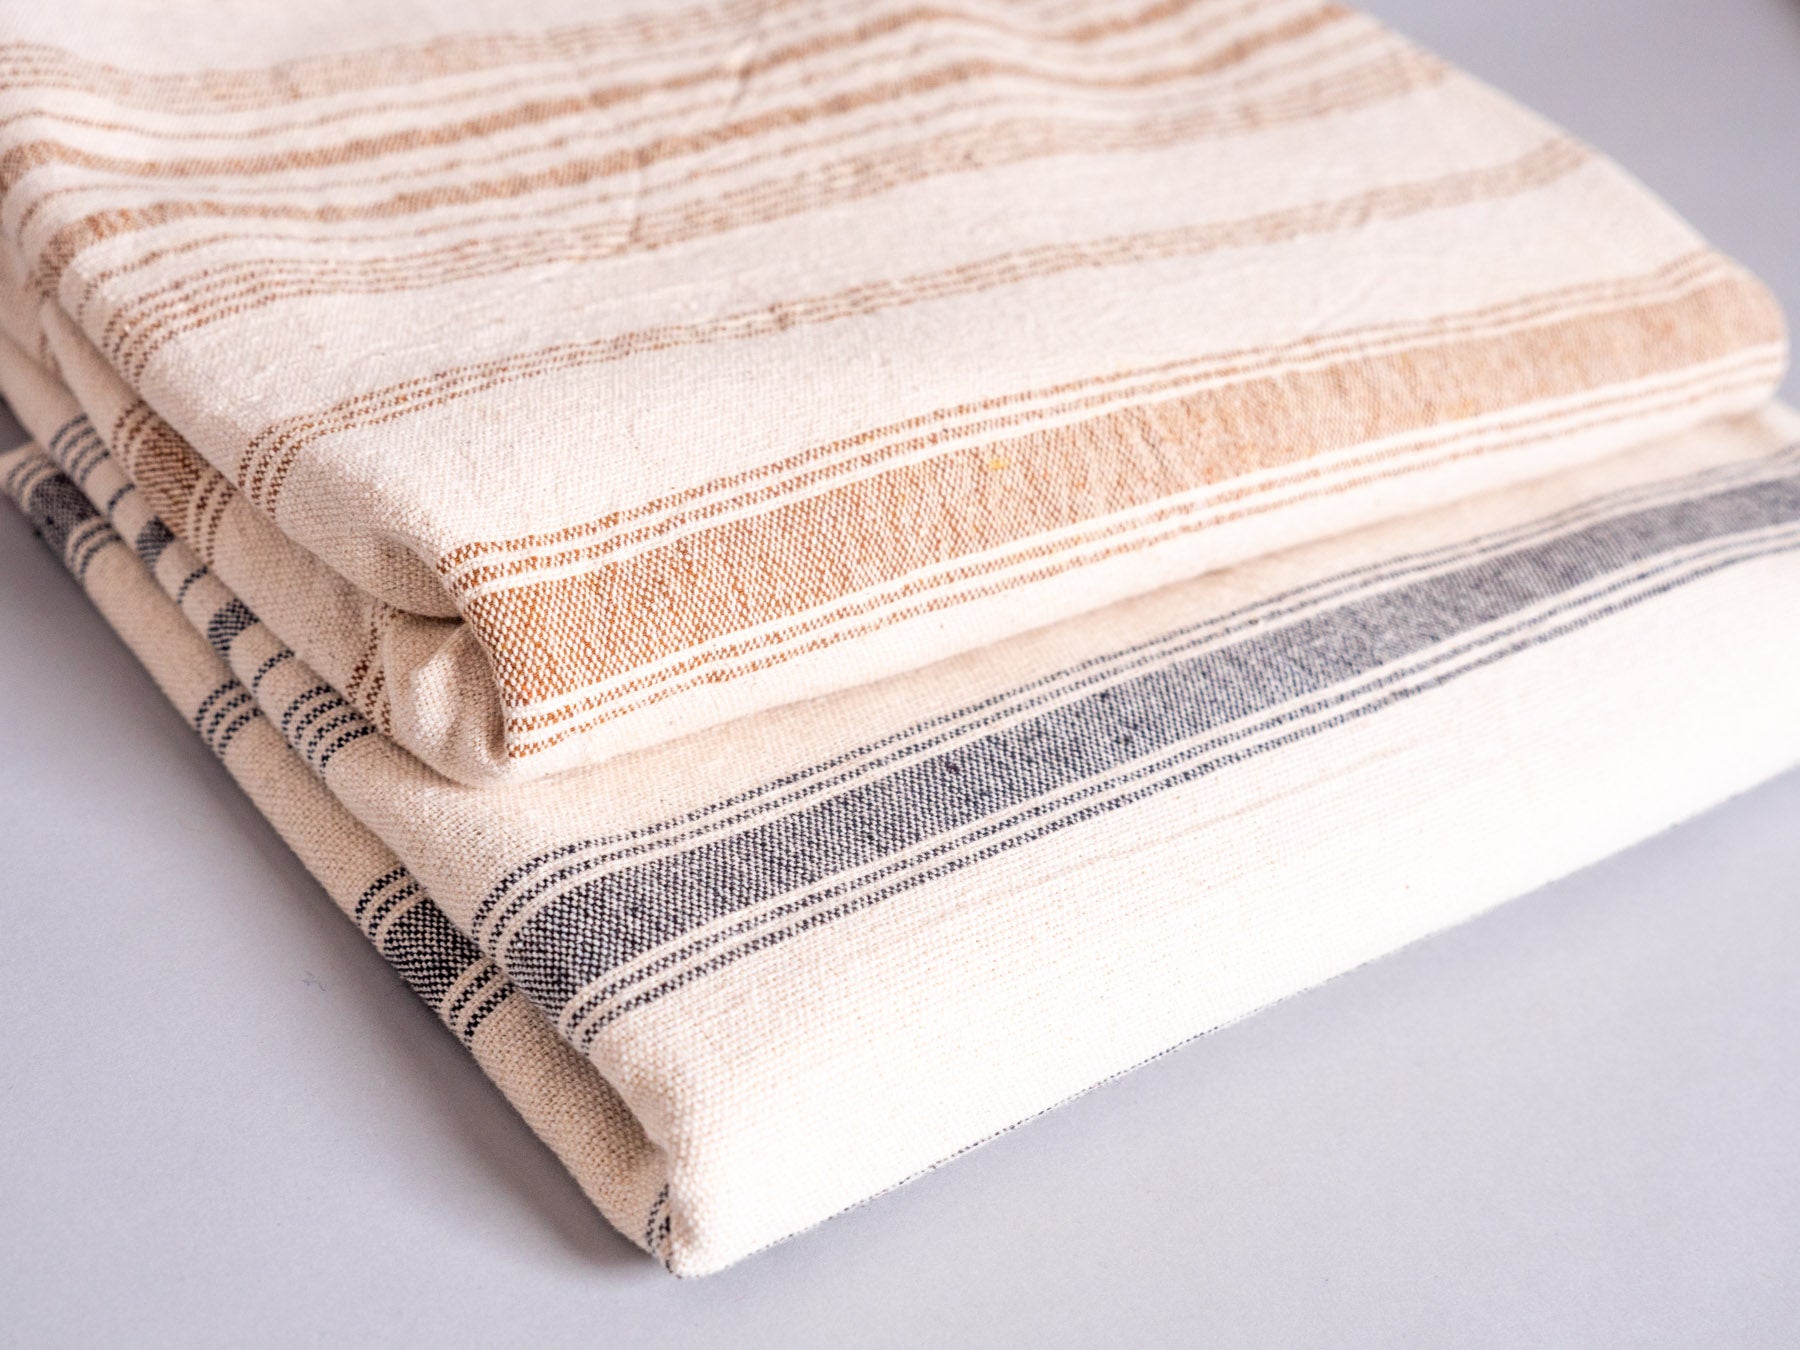 Hand loomed striped cotton towel